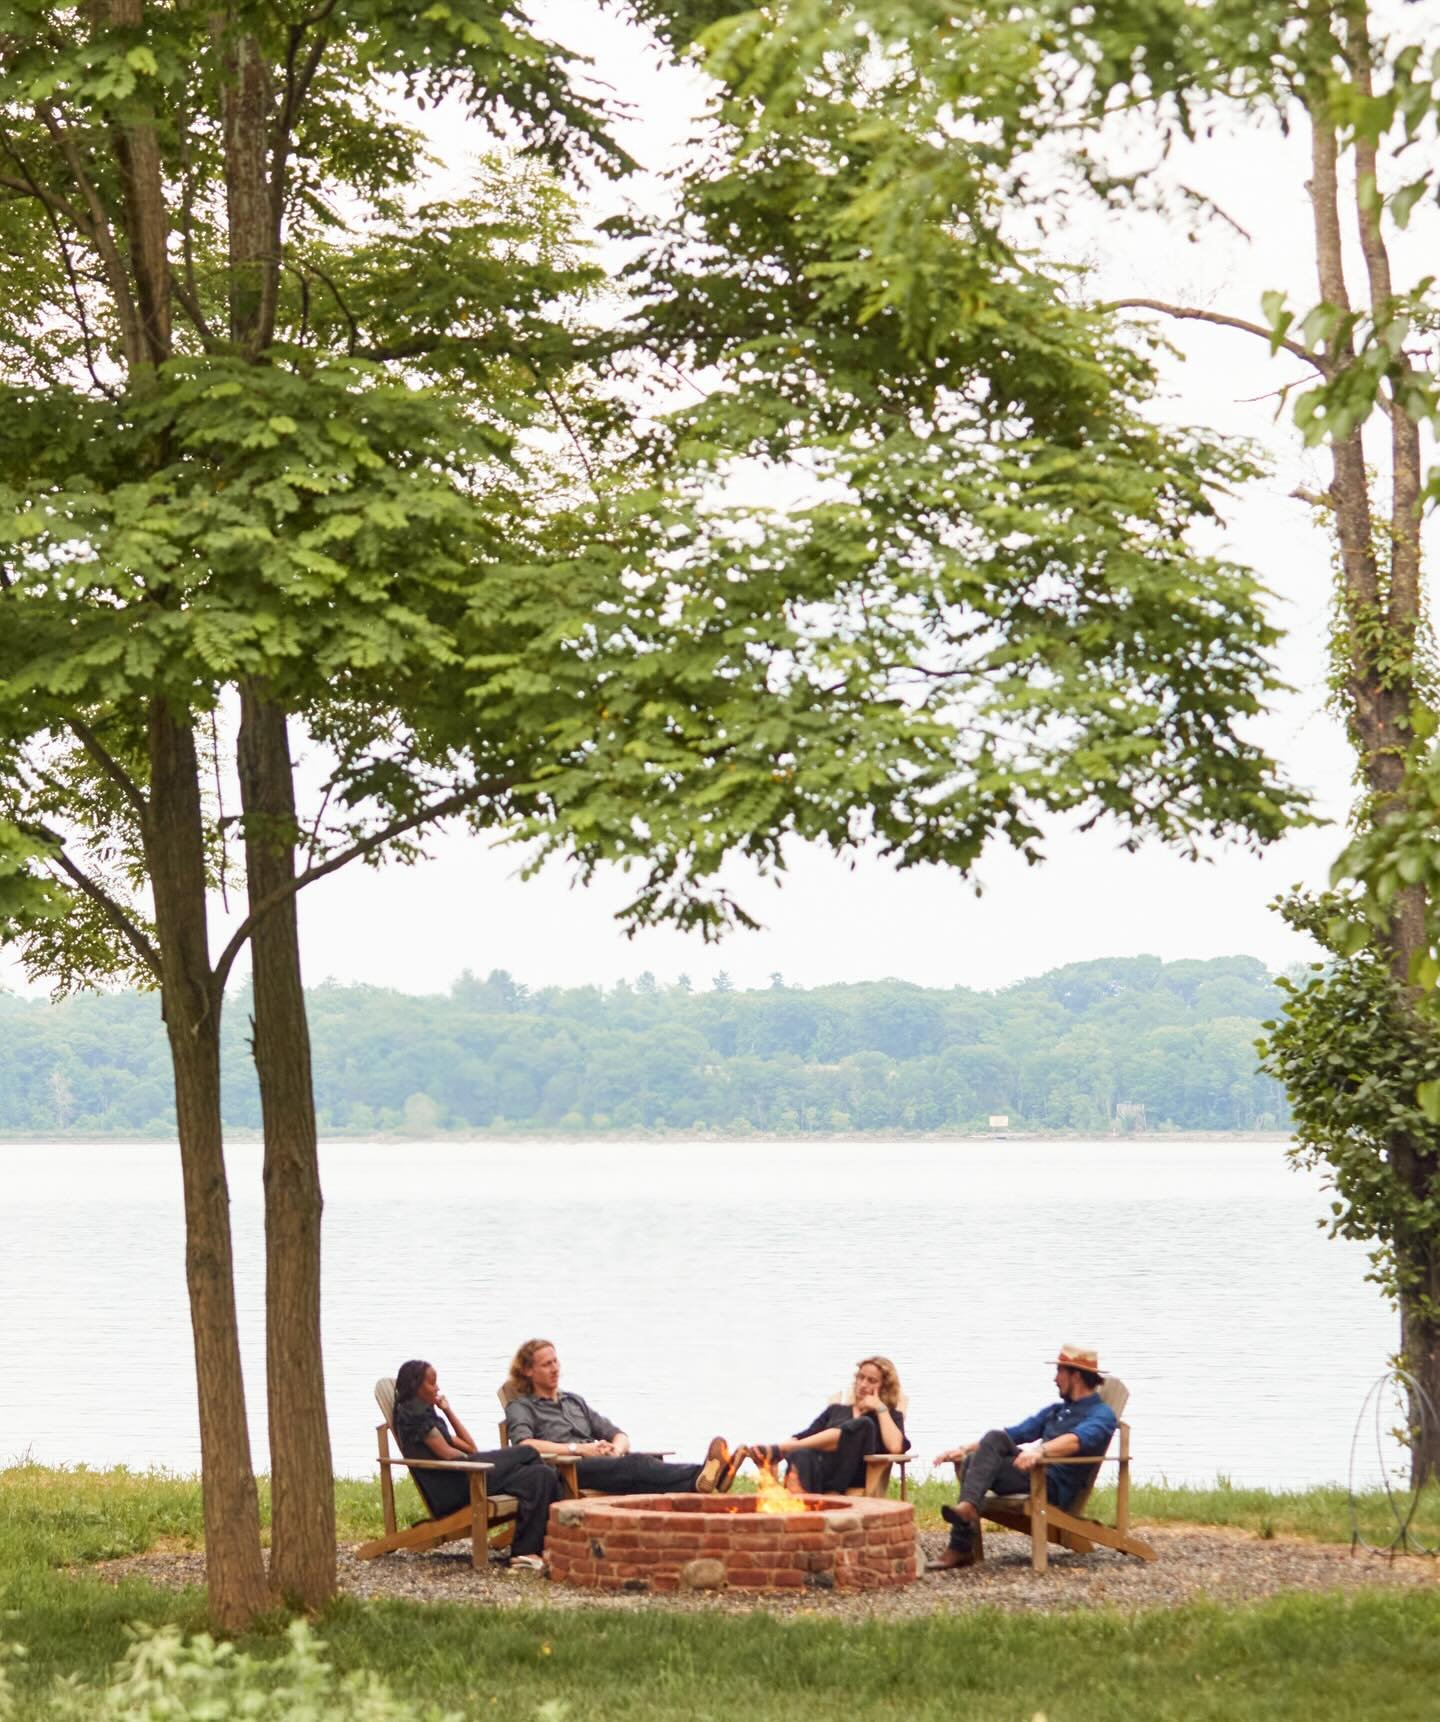 Bask in serene moments by the Hudson River this spring. We&rsquo;re your sanctuary for rejuvenating getaways everyone will treasure. #HuttonBrickyards